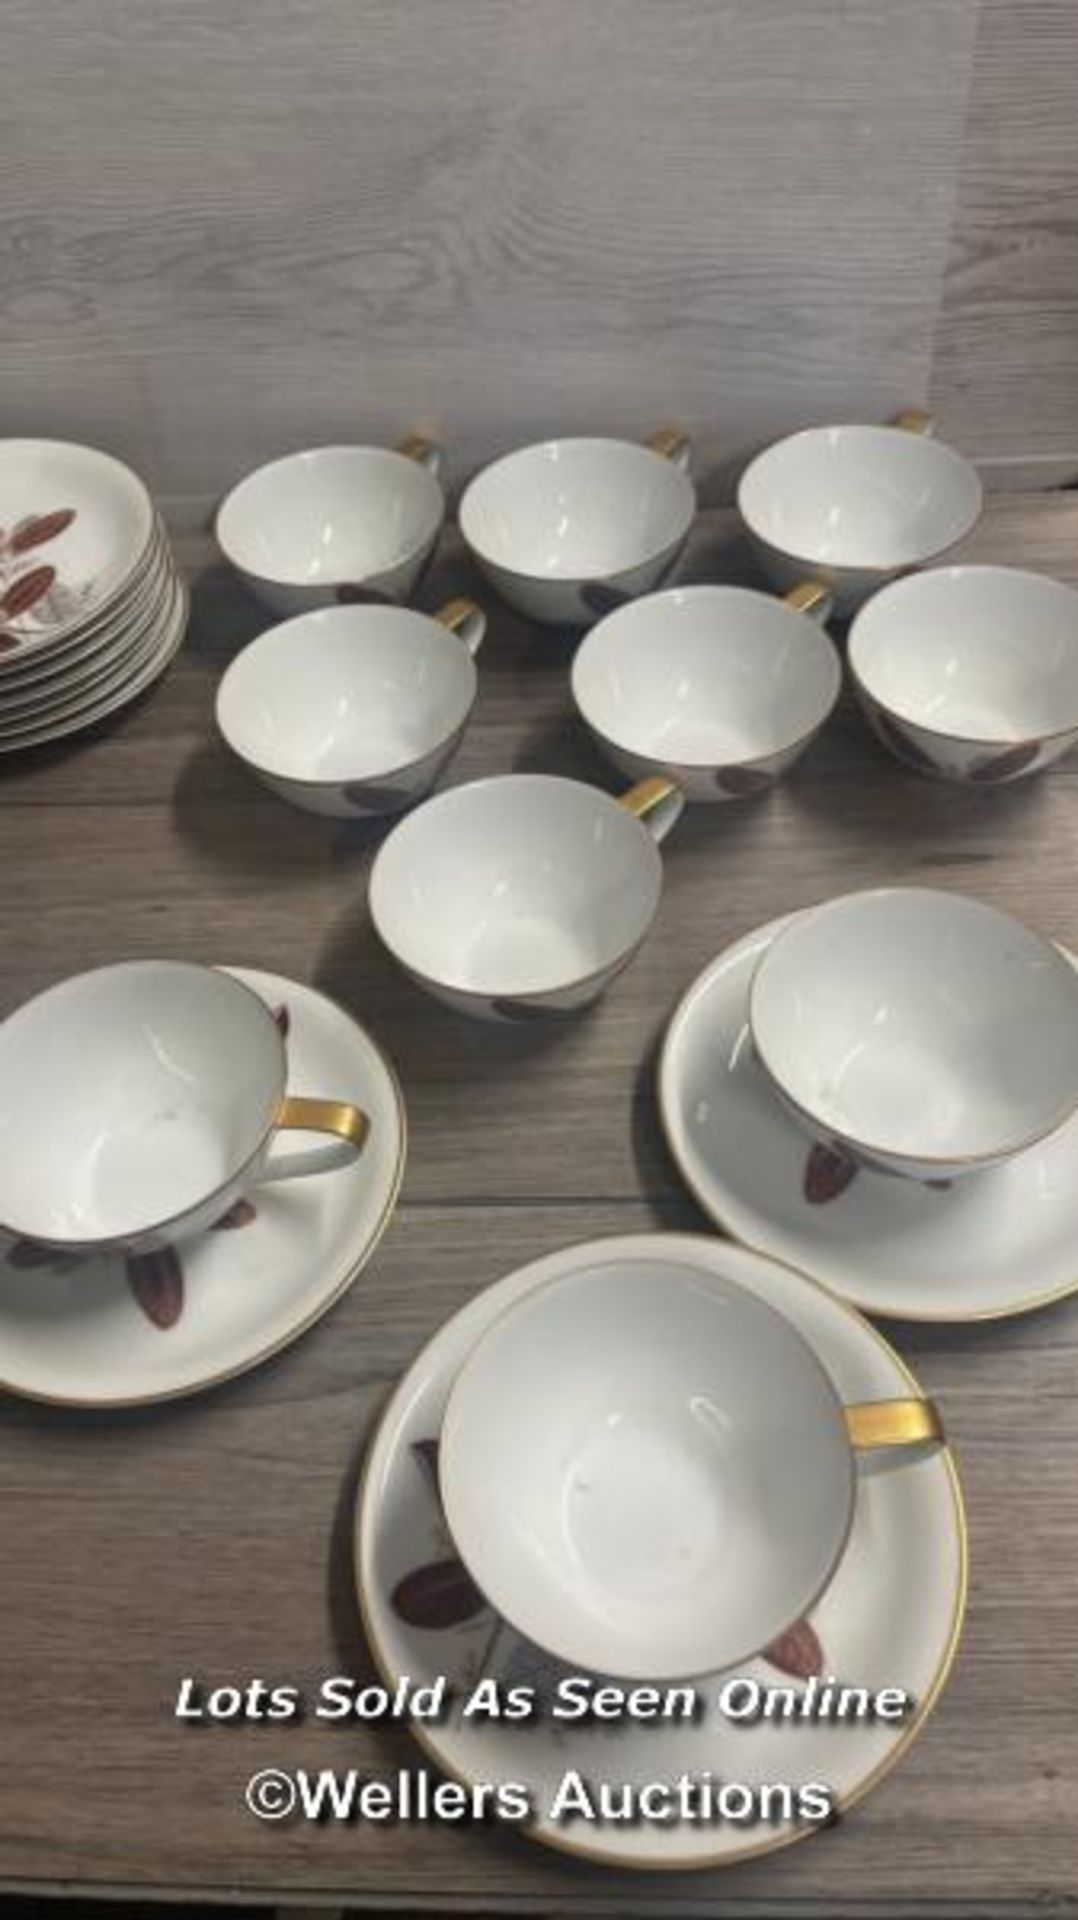 A PART NORITAKE CHINA TABLE SERVICE INCLUDING PLATES, SERVING DISHES & CUPS (62) - Image 4 of 12